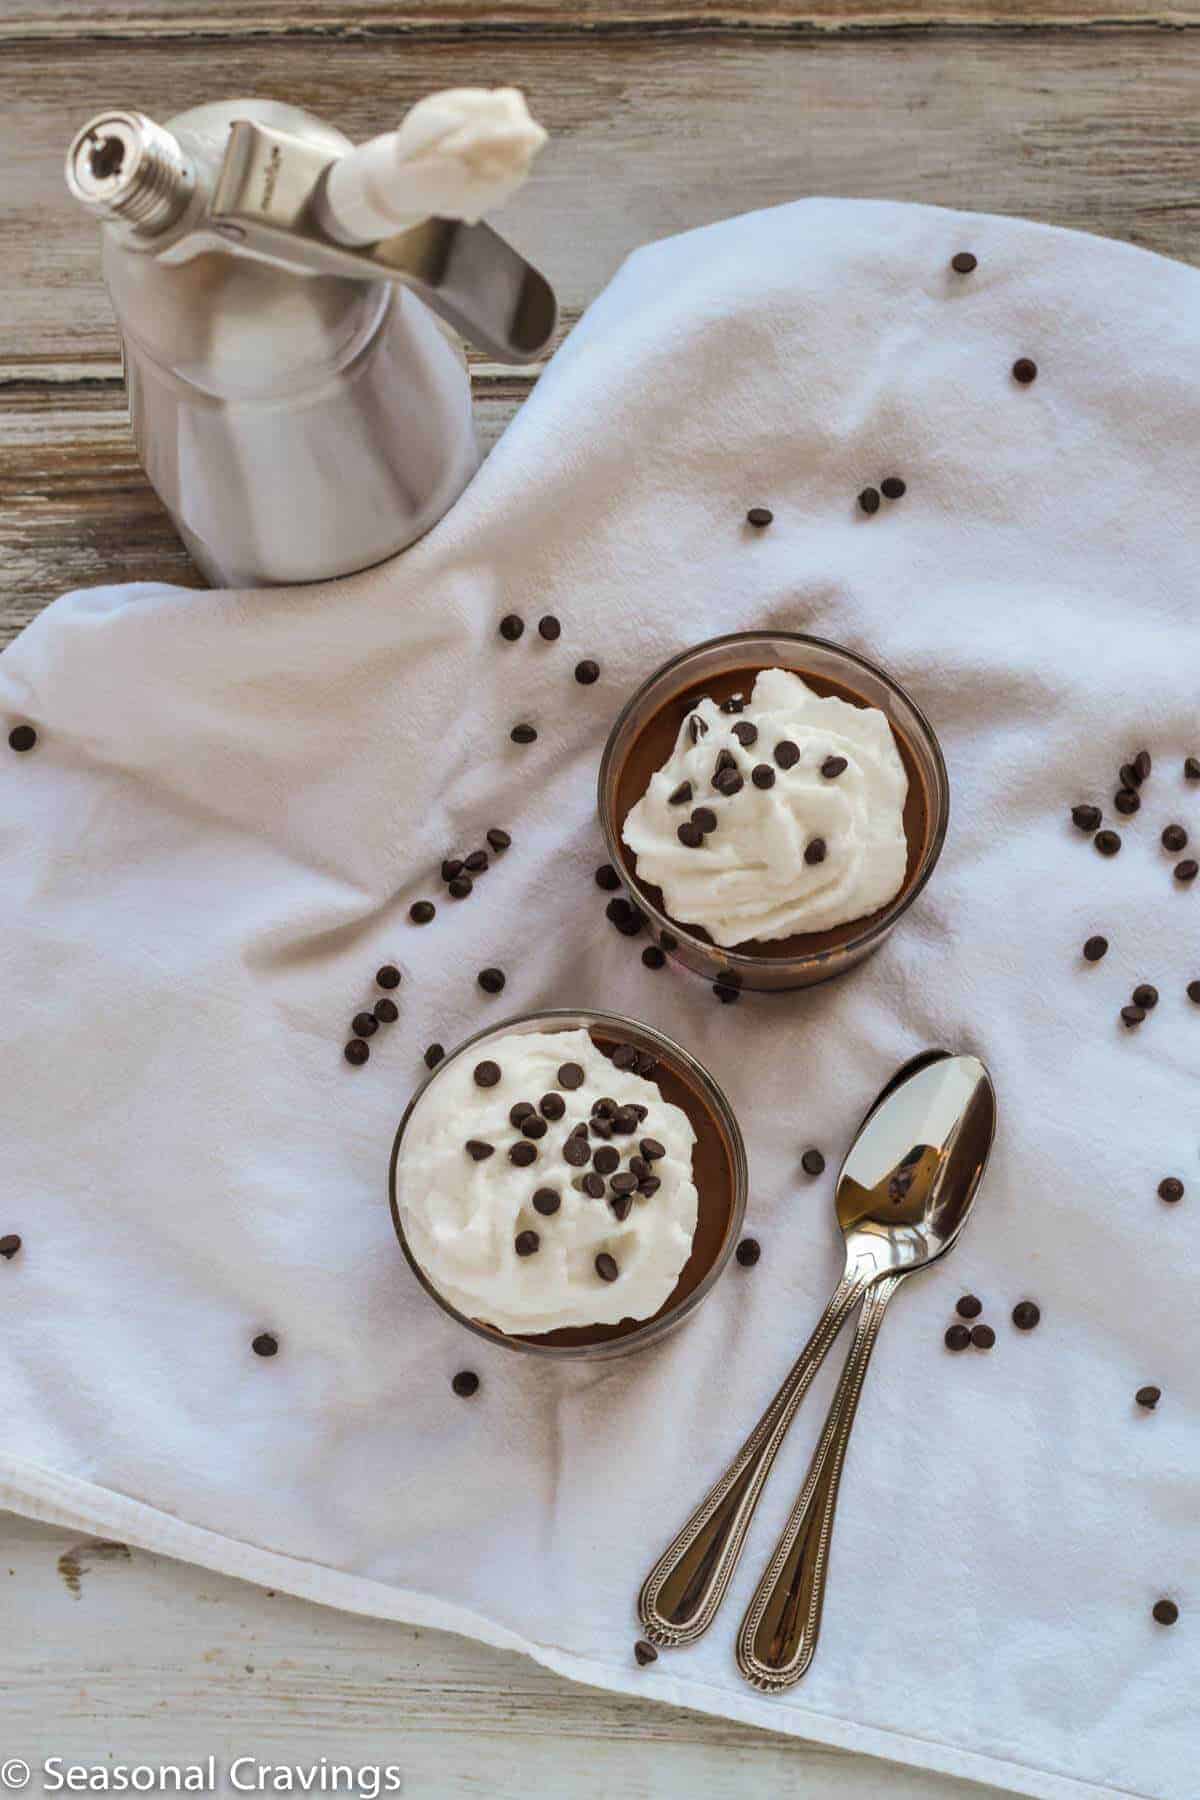 Two Ingredient Chocolate Mousse with Coconut Whipped Cream